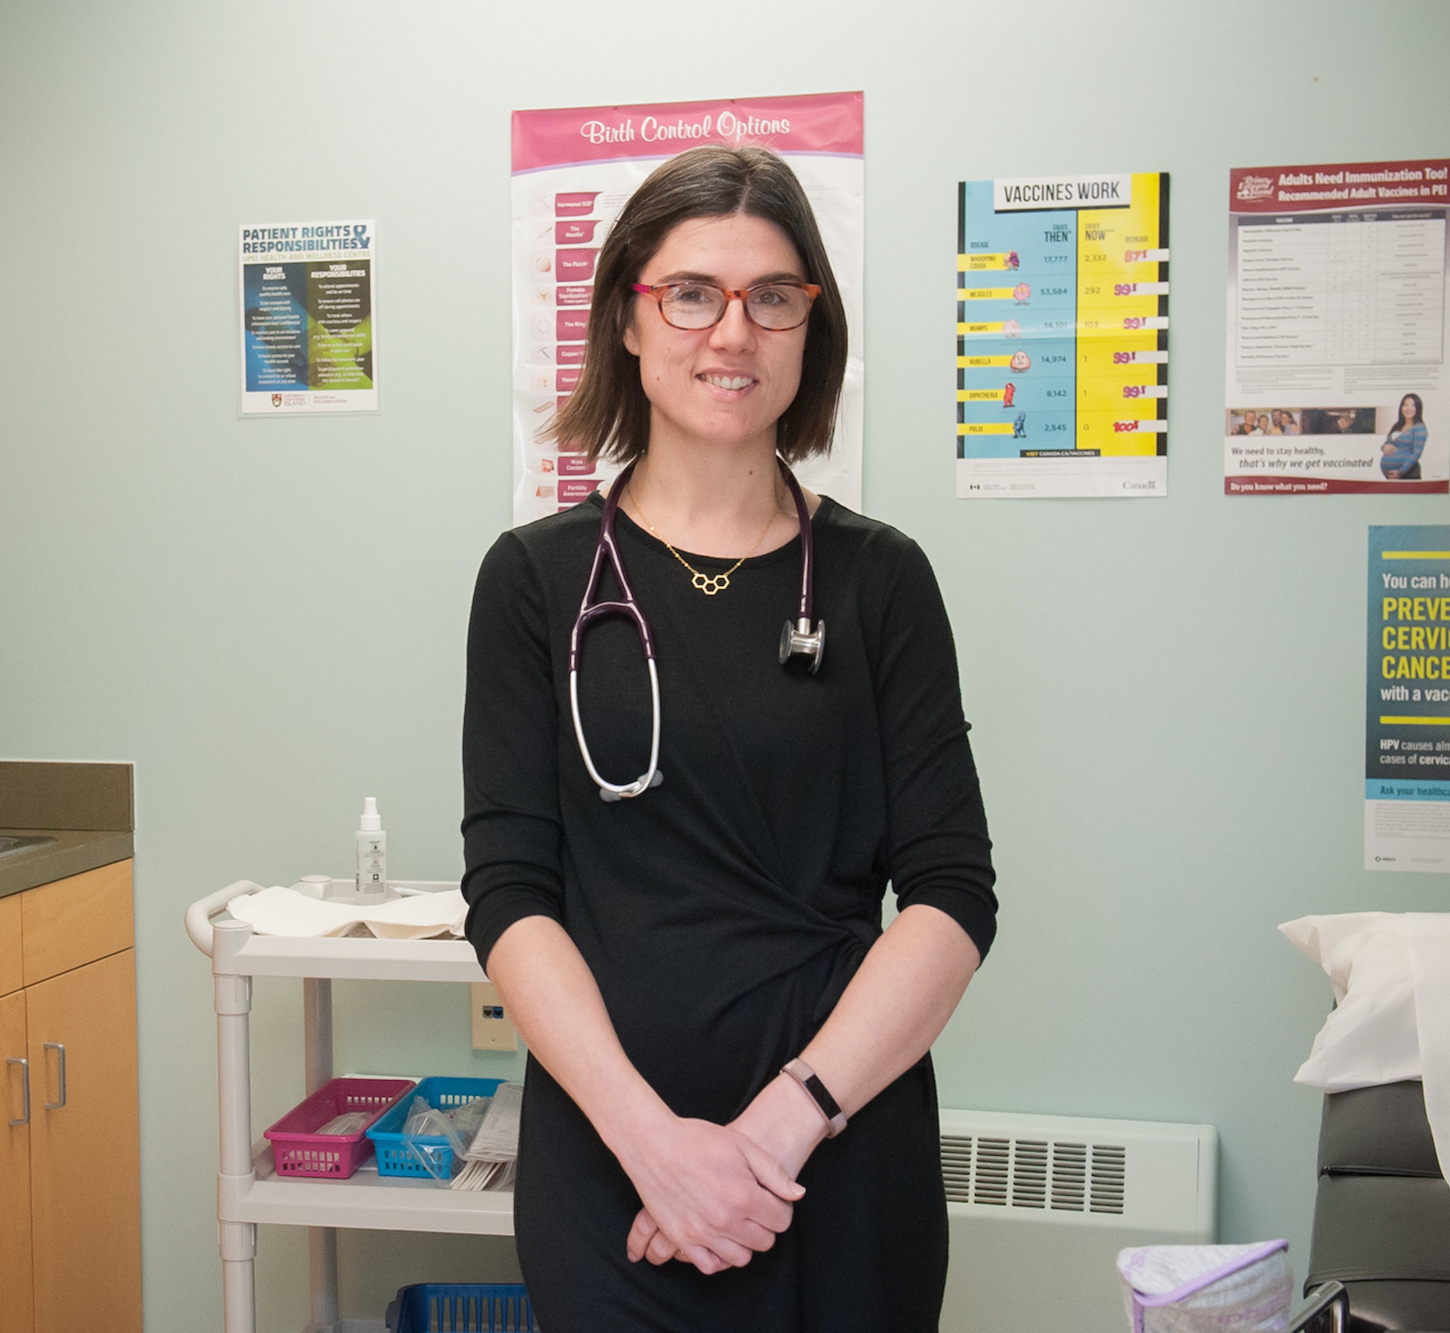 dr. ashby and the BCA Health Clinic